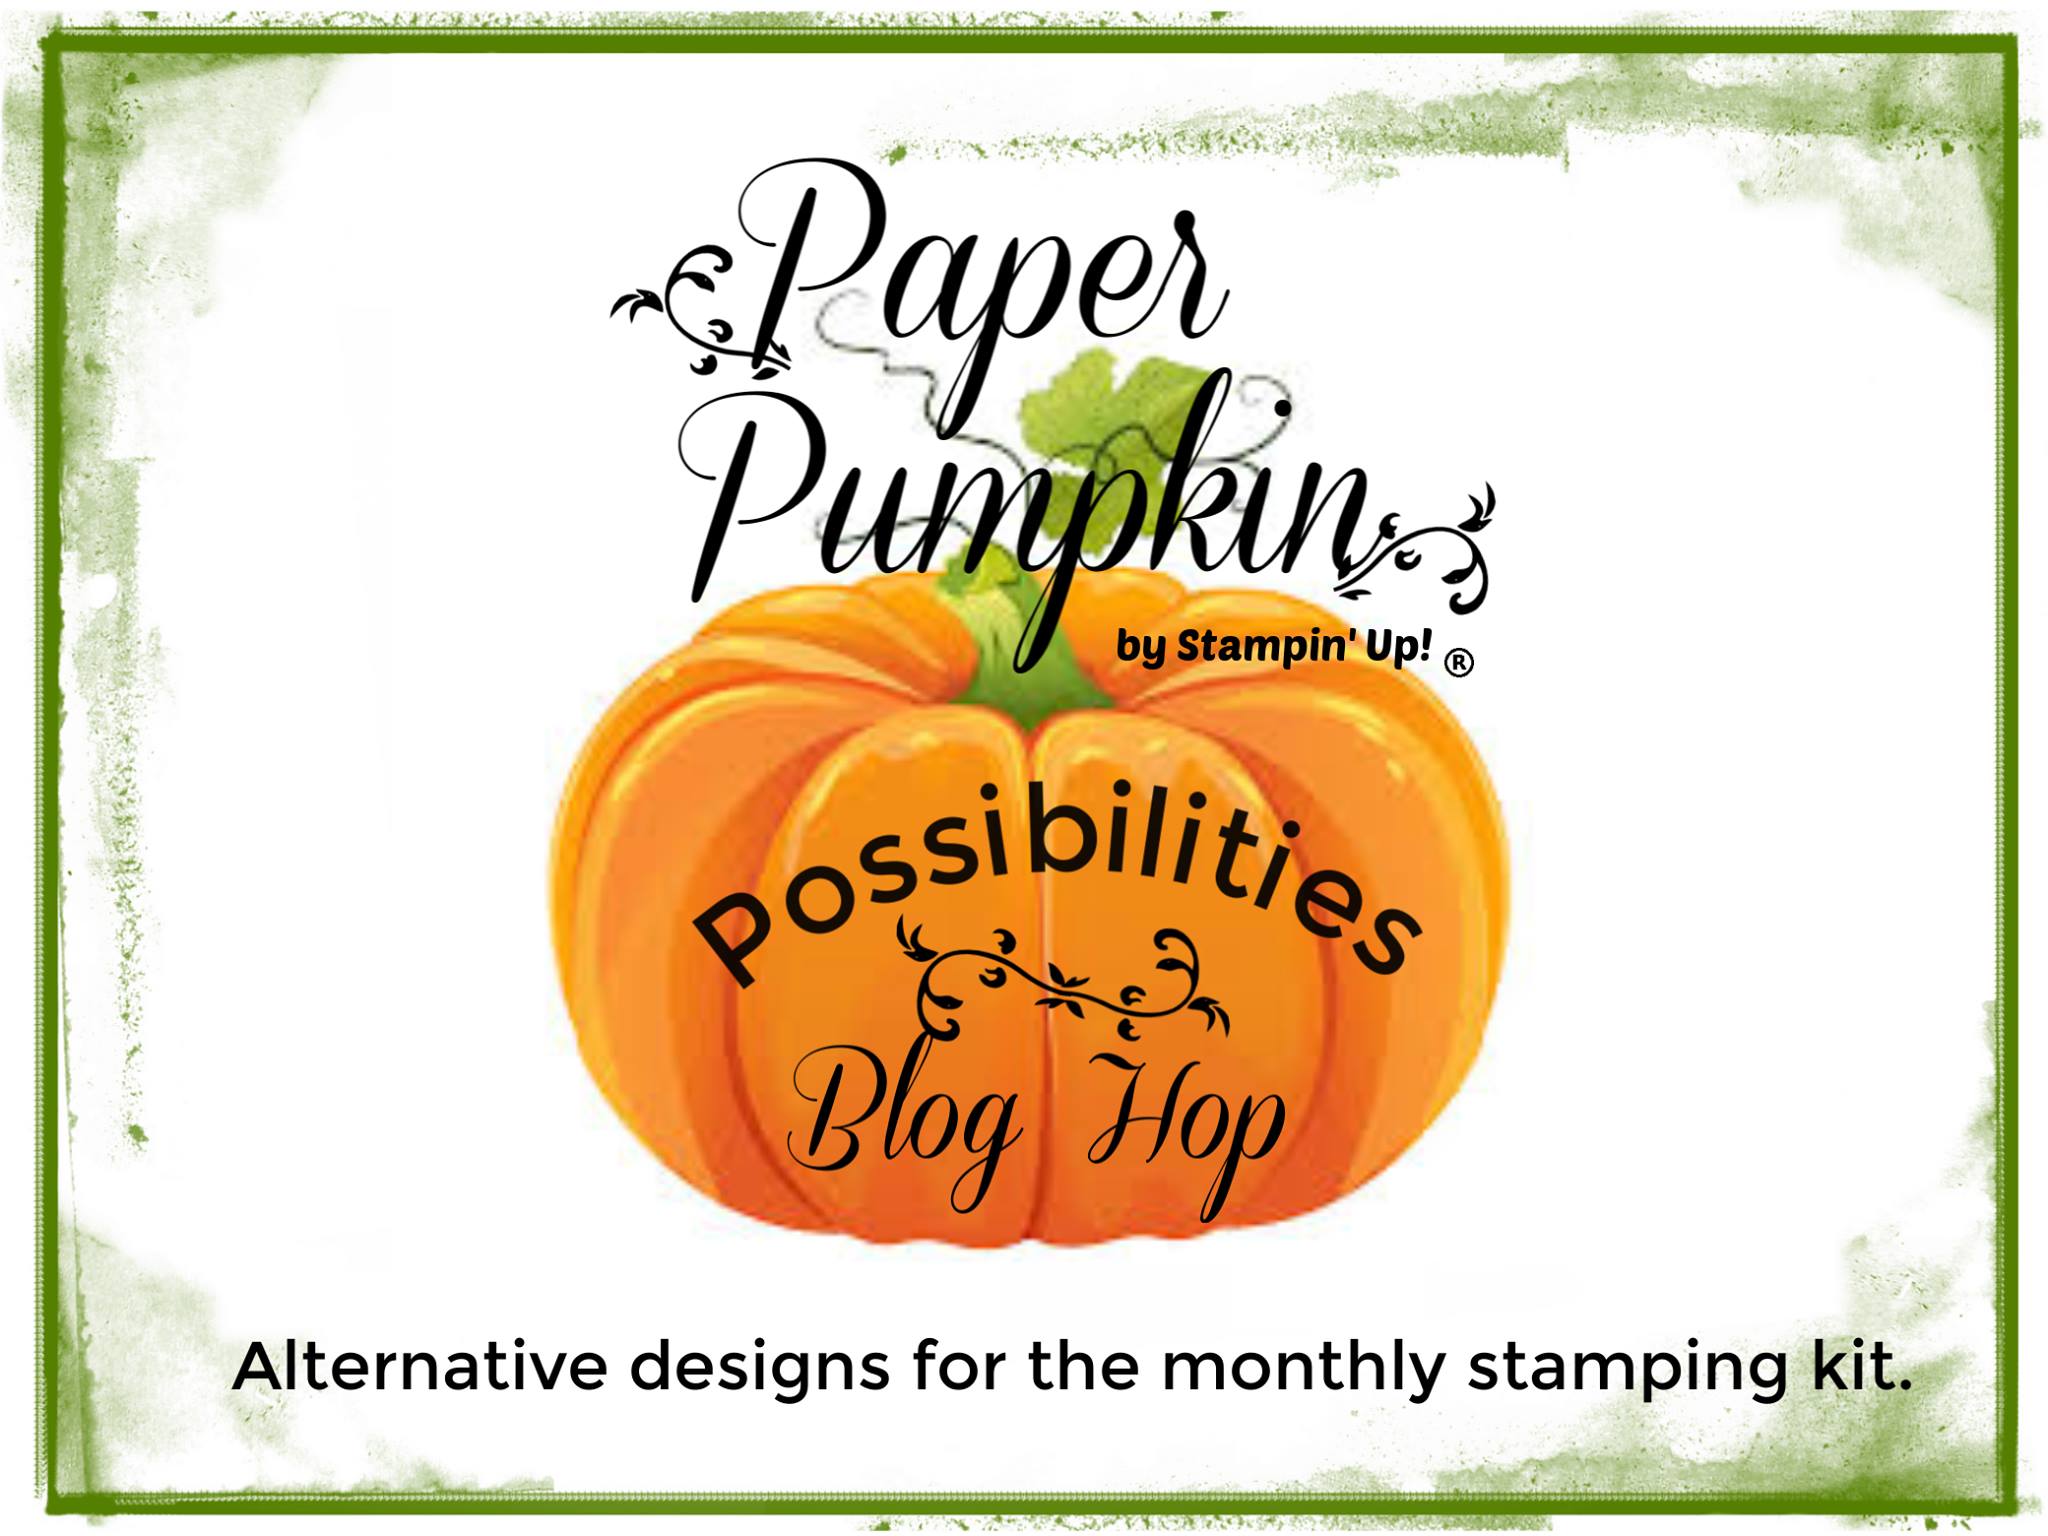 Paper Pumpkin Possibilities Gifts Galore is our November theme